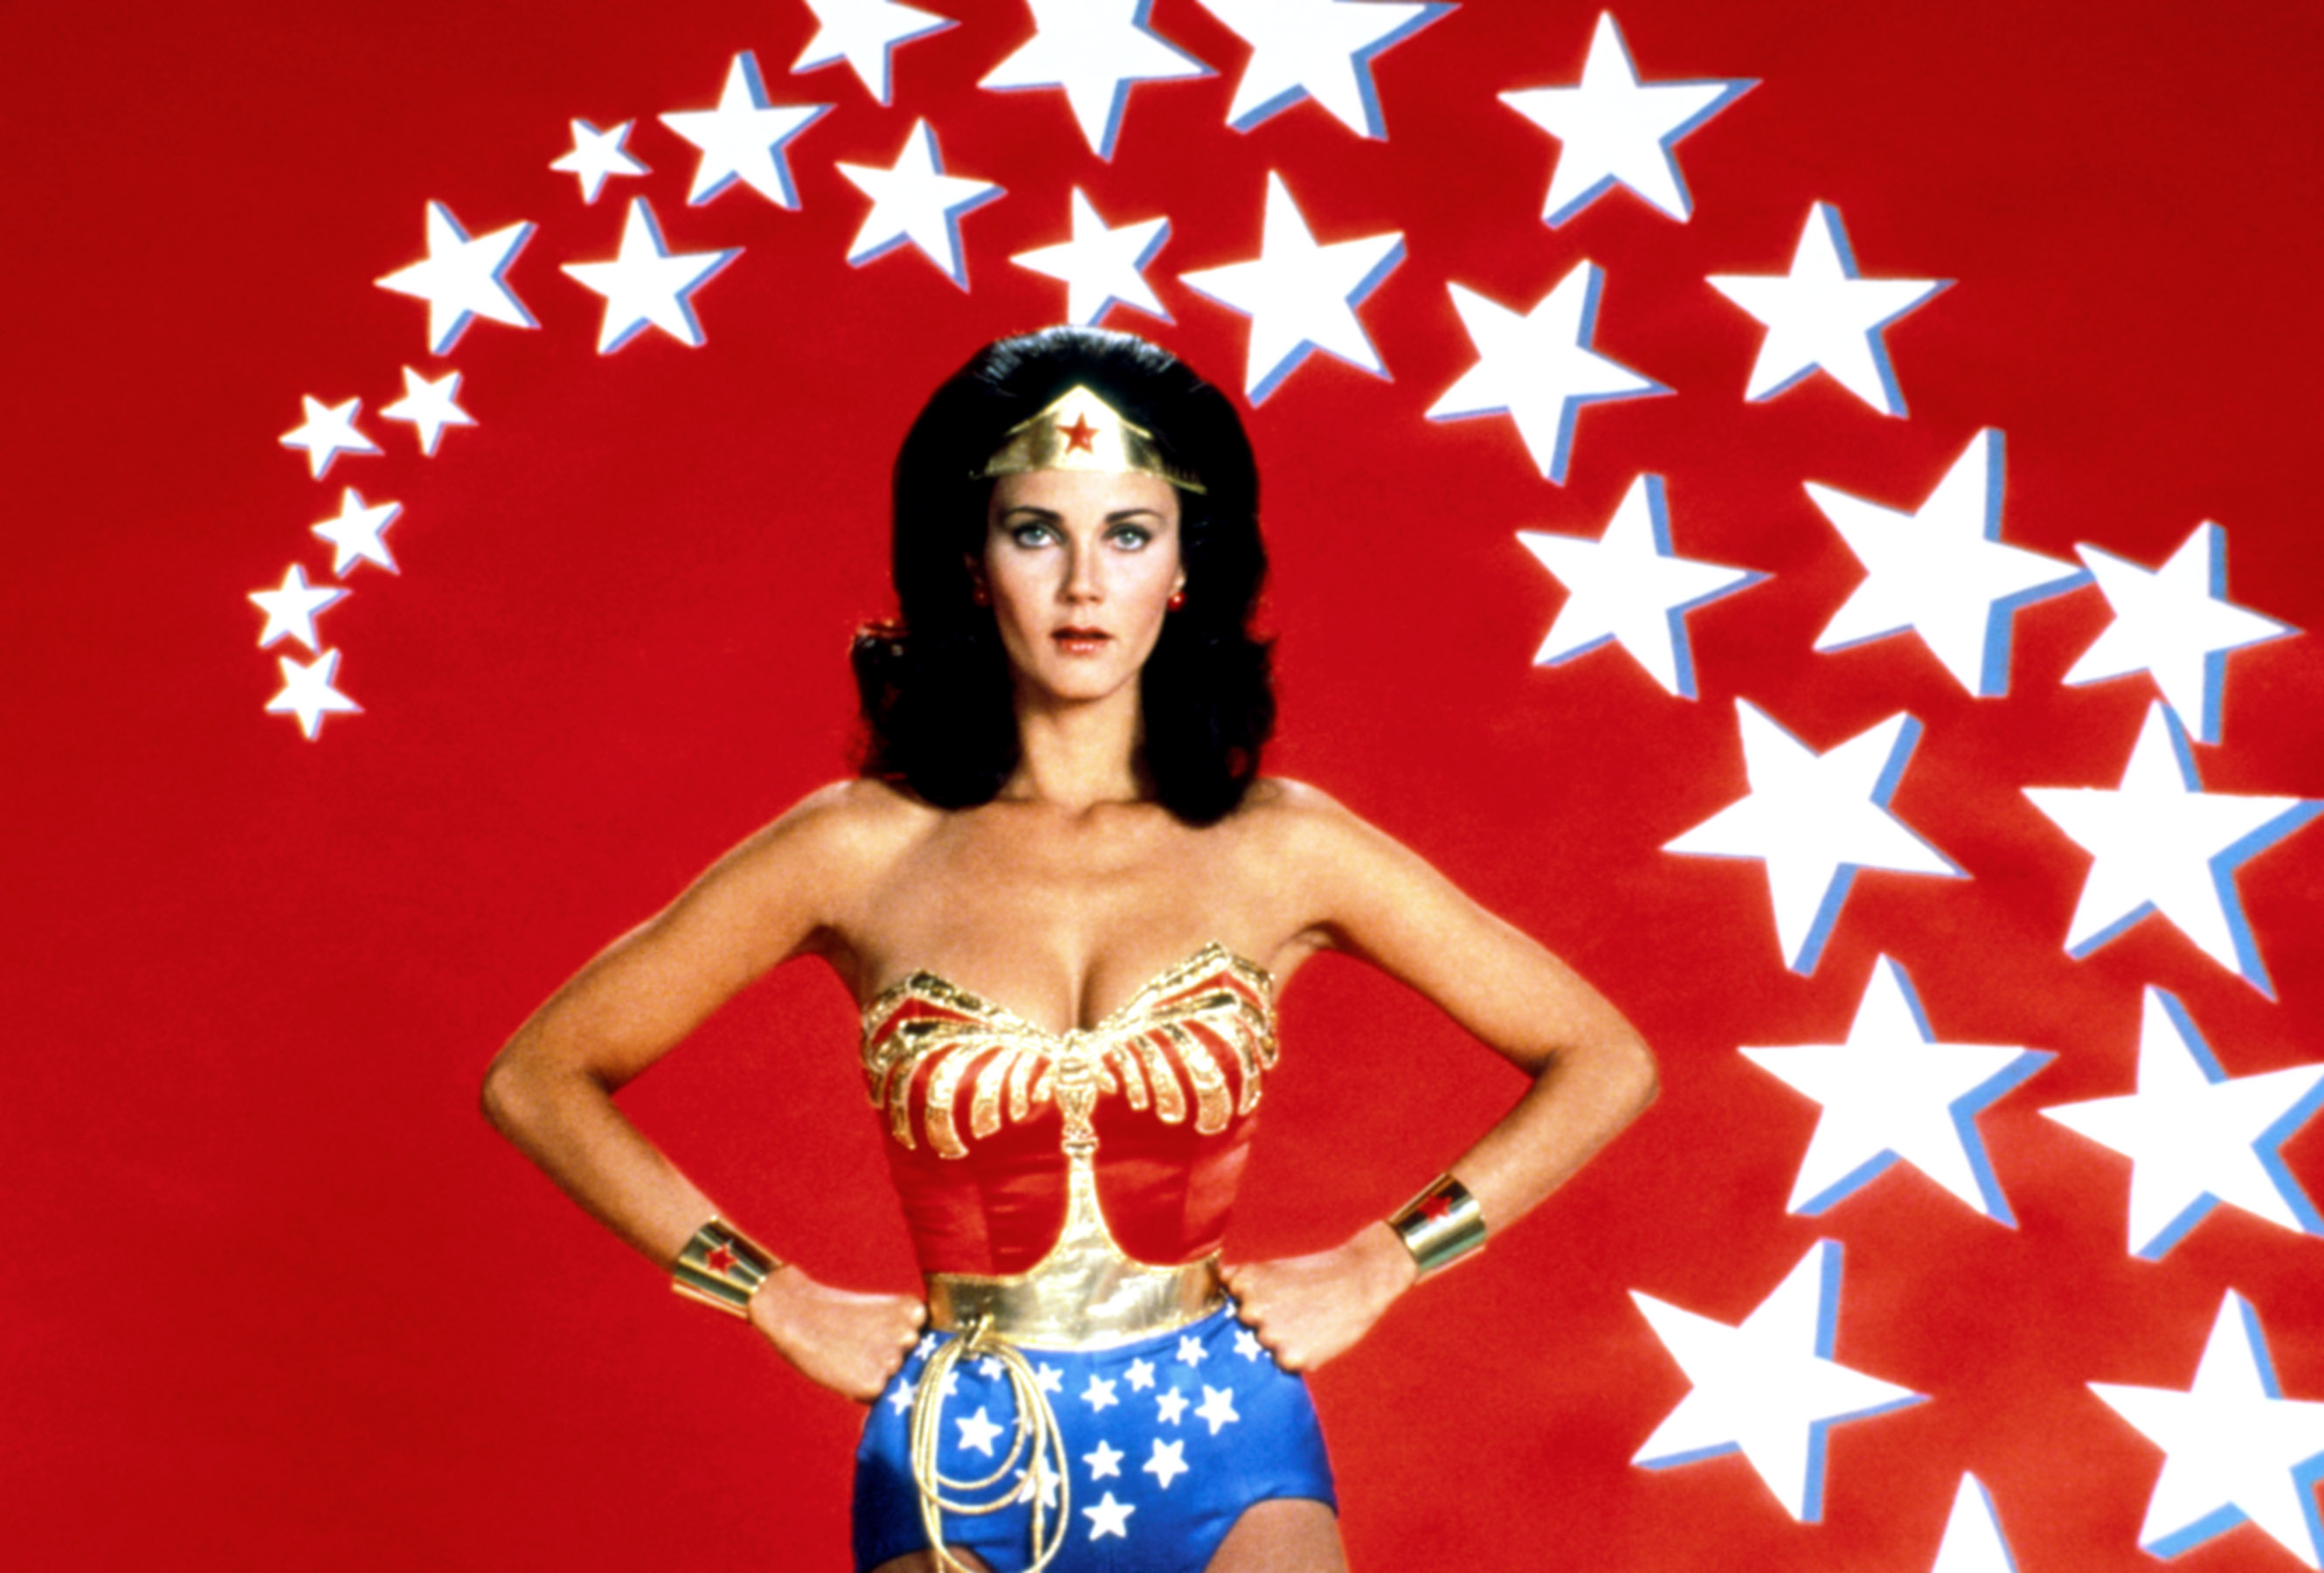 DC’s ‘Wonder Woman’ TV Series Starring Lynda Carter Now Available To Stream On HBO Max